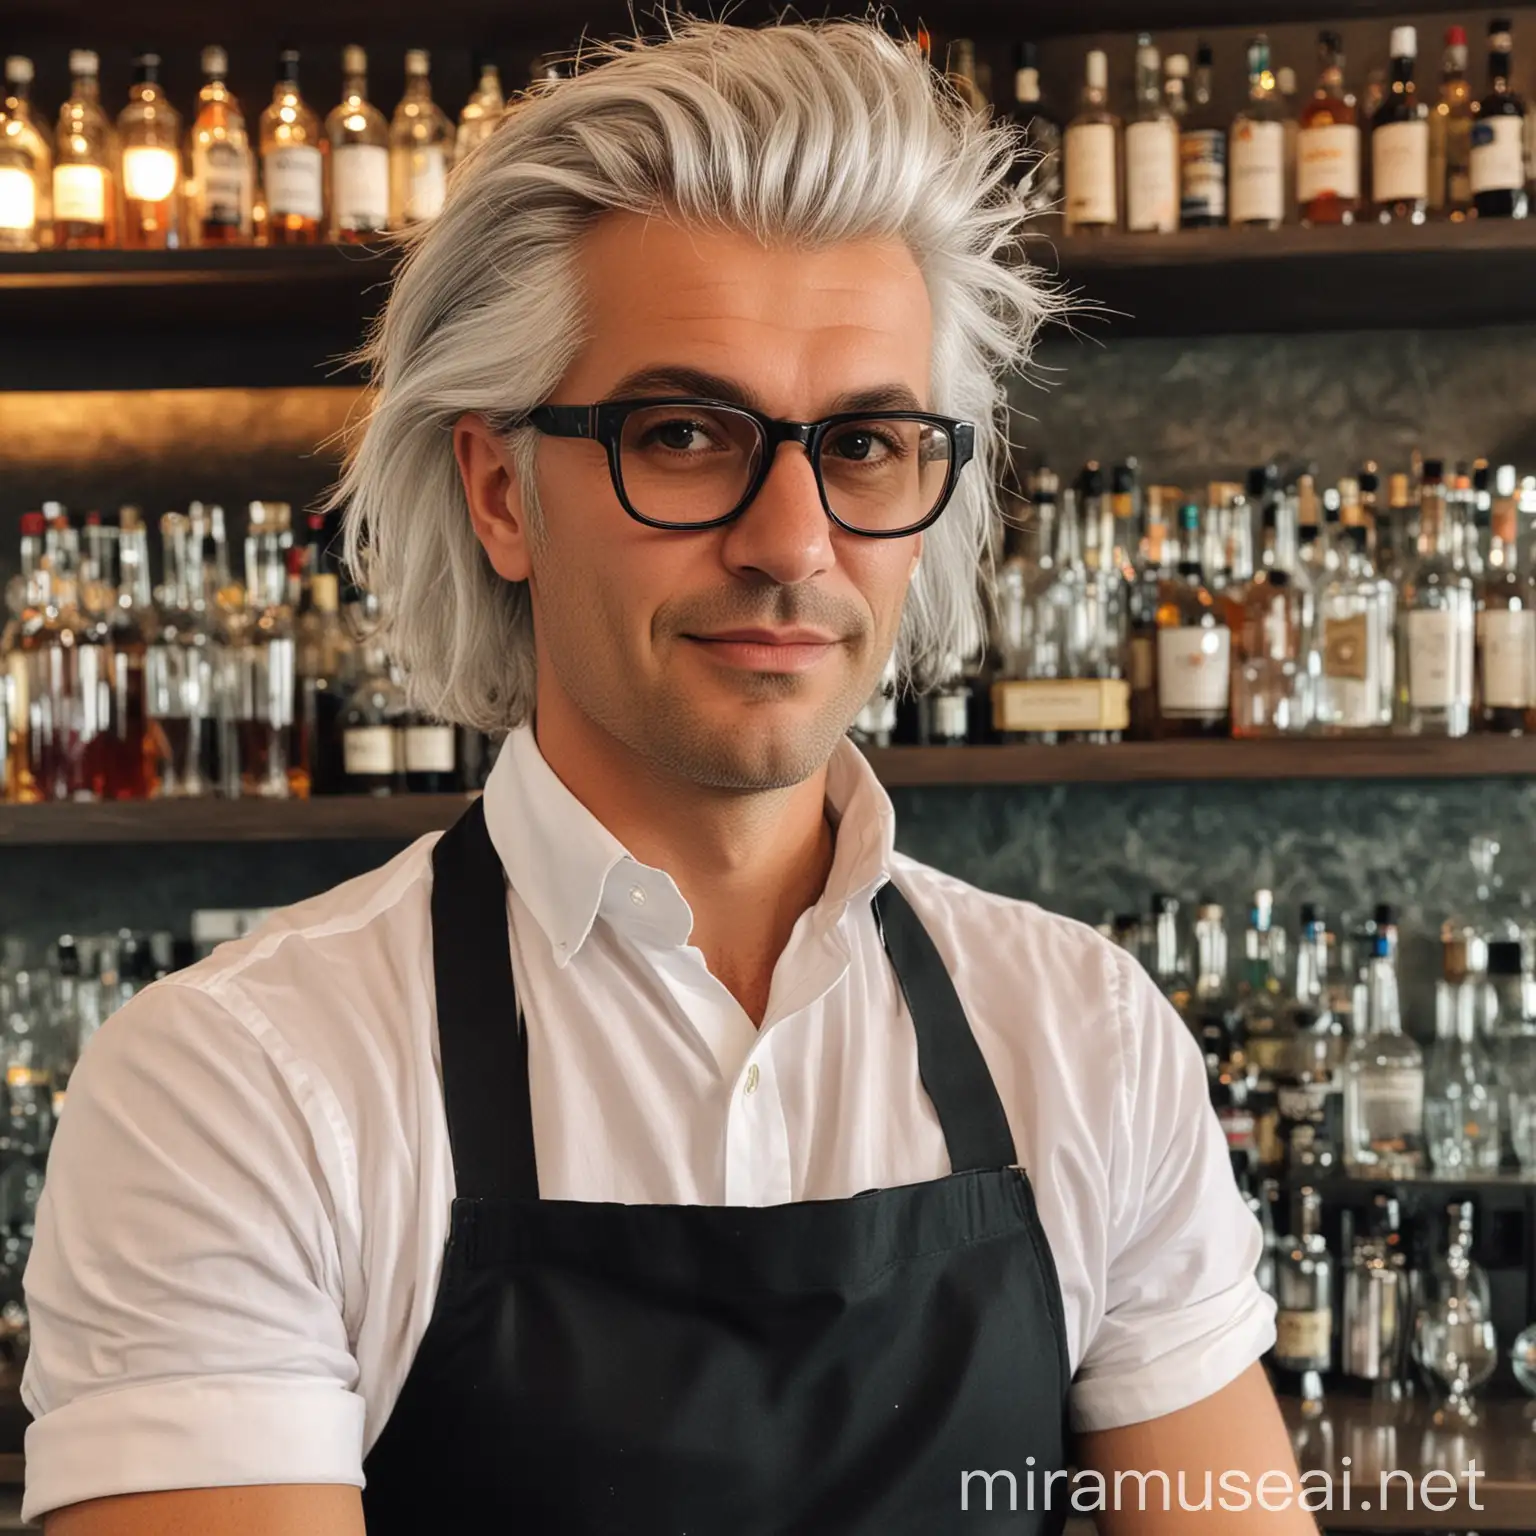 Stylish Austrian Bartender with Grey Hair and Trendy Glasses Serving Drinks